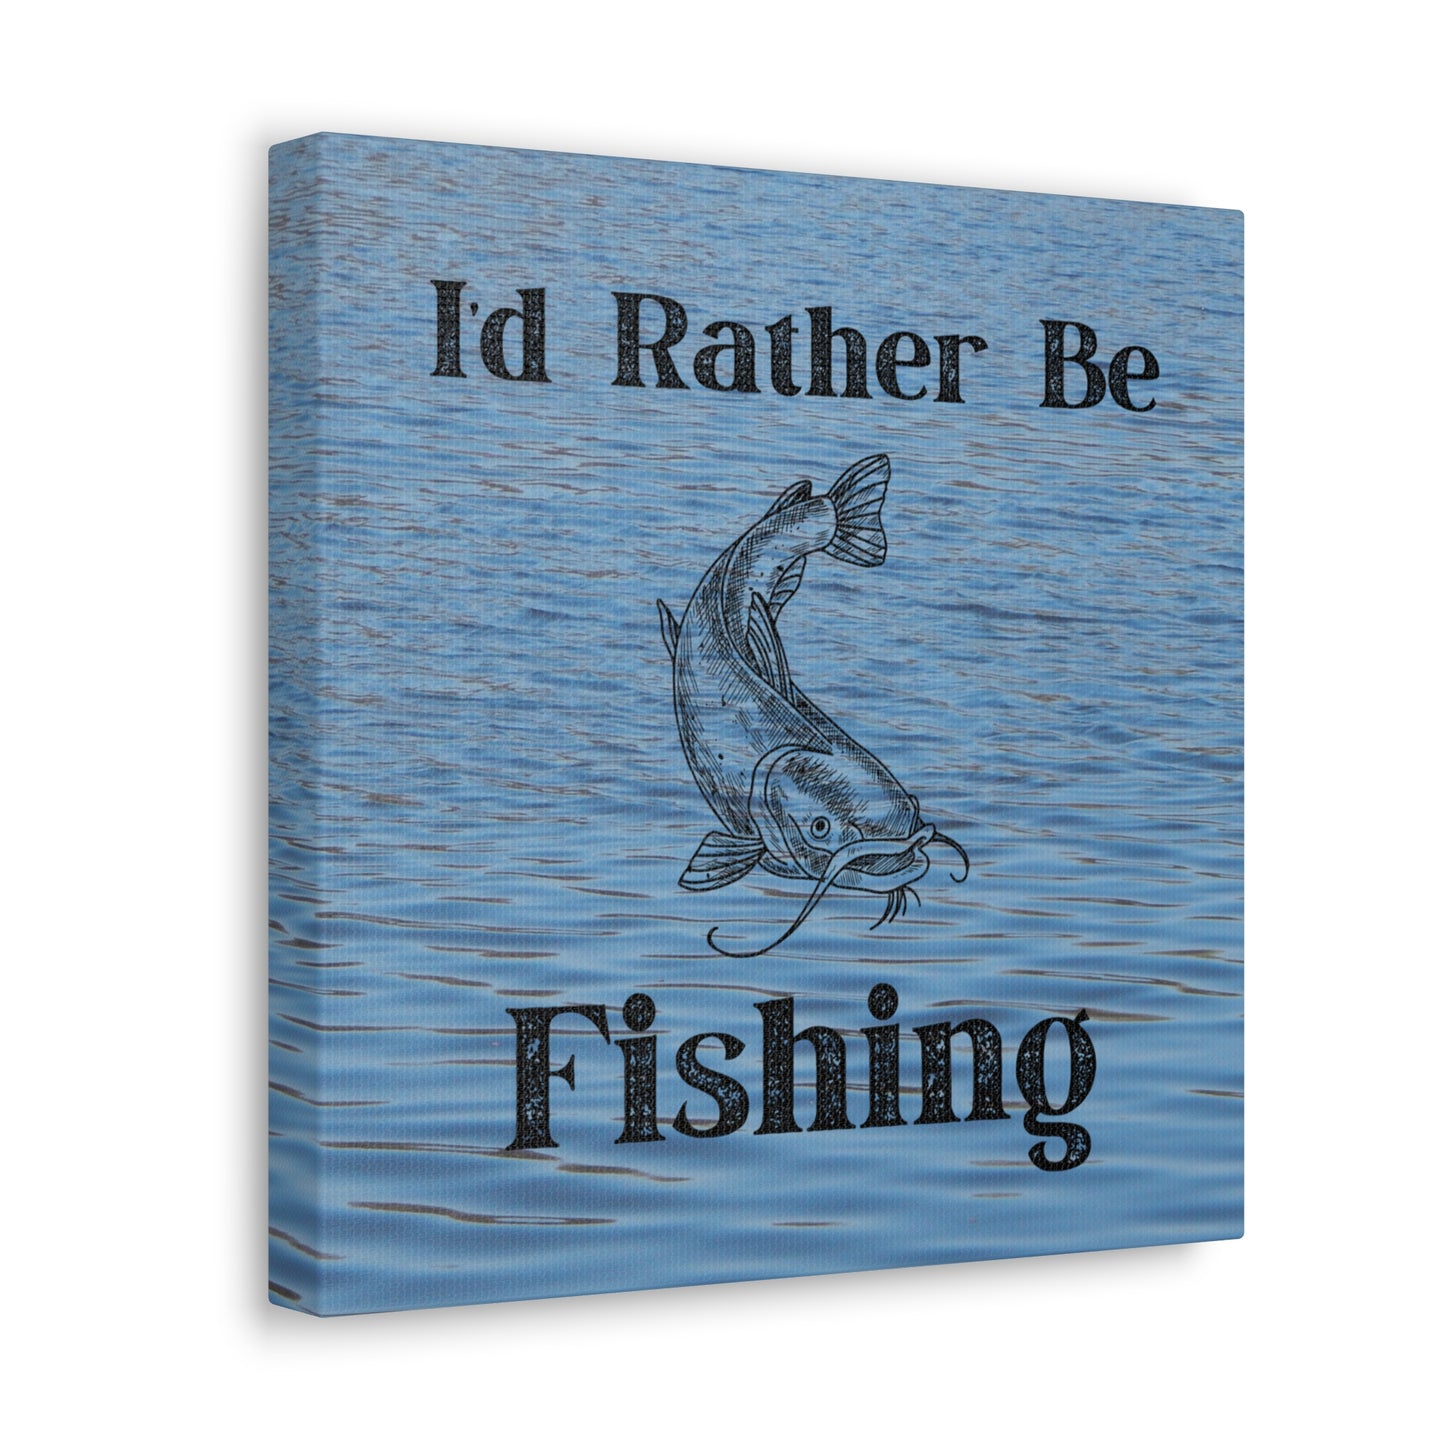 "I'd Rather Be Fishing" Wall Art - Weave Got Gifts - Unique Gifts You Won’t Find Anywhere Else!